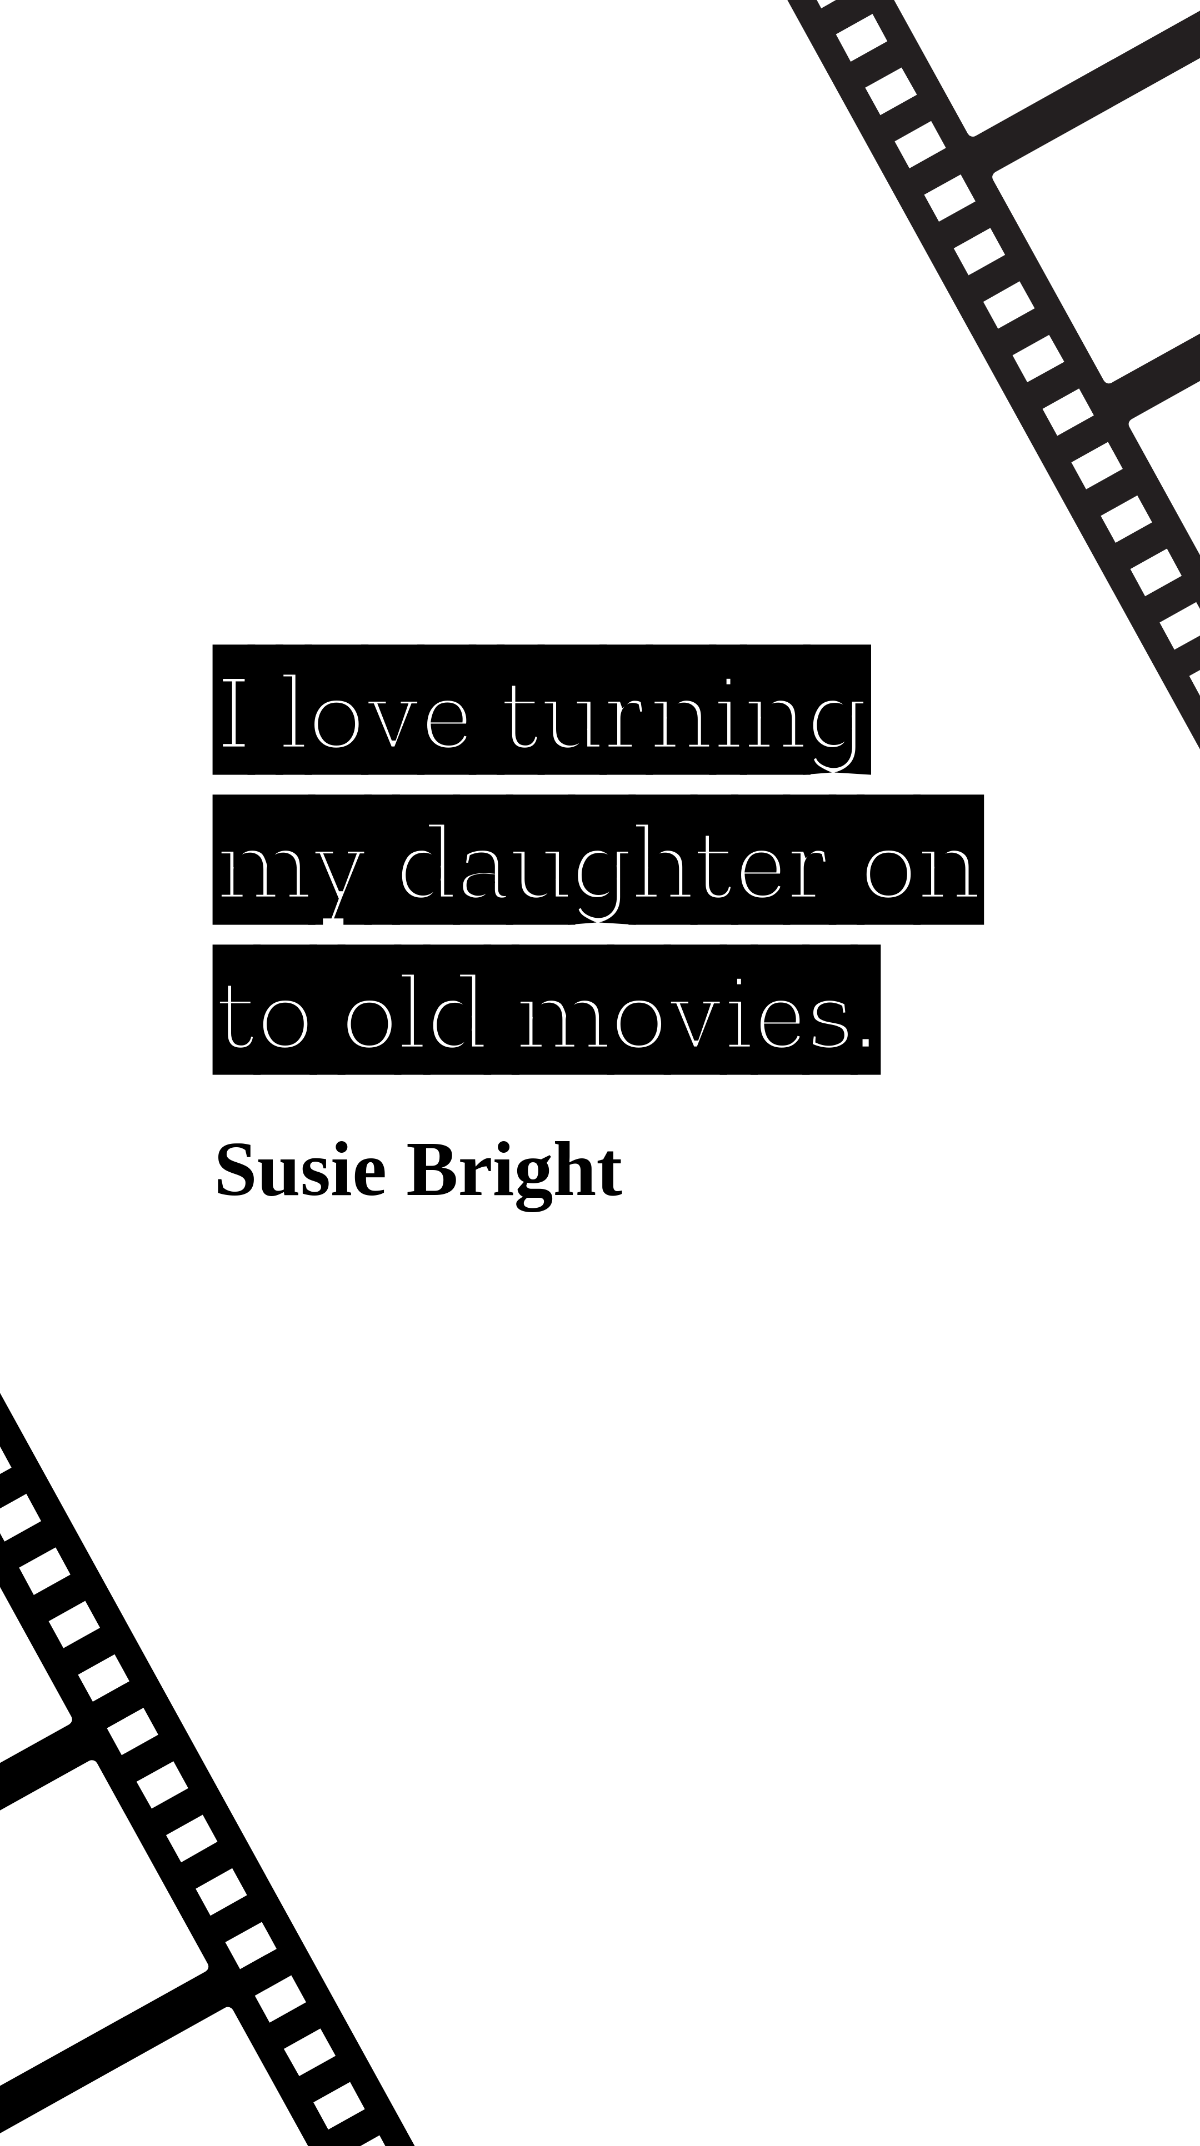 Susie Bright - I love turning my daughter on to old movies. Template